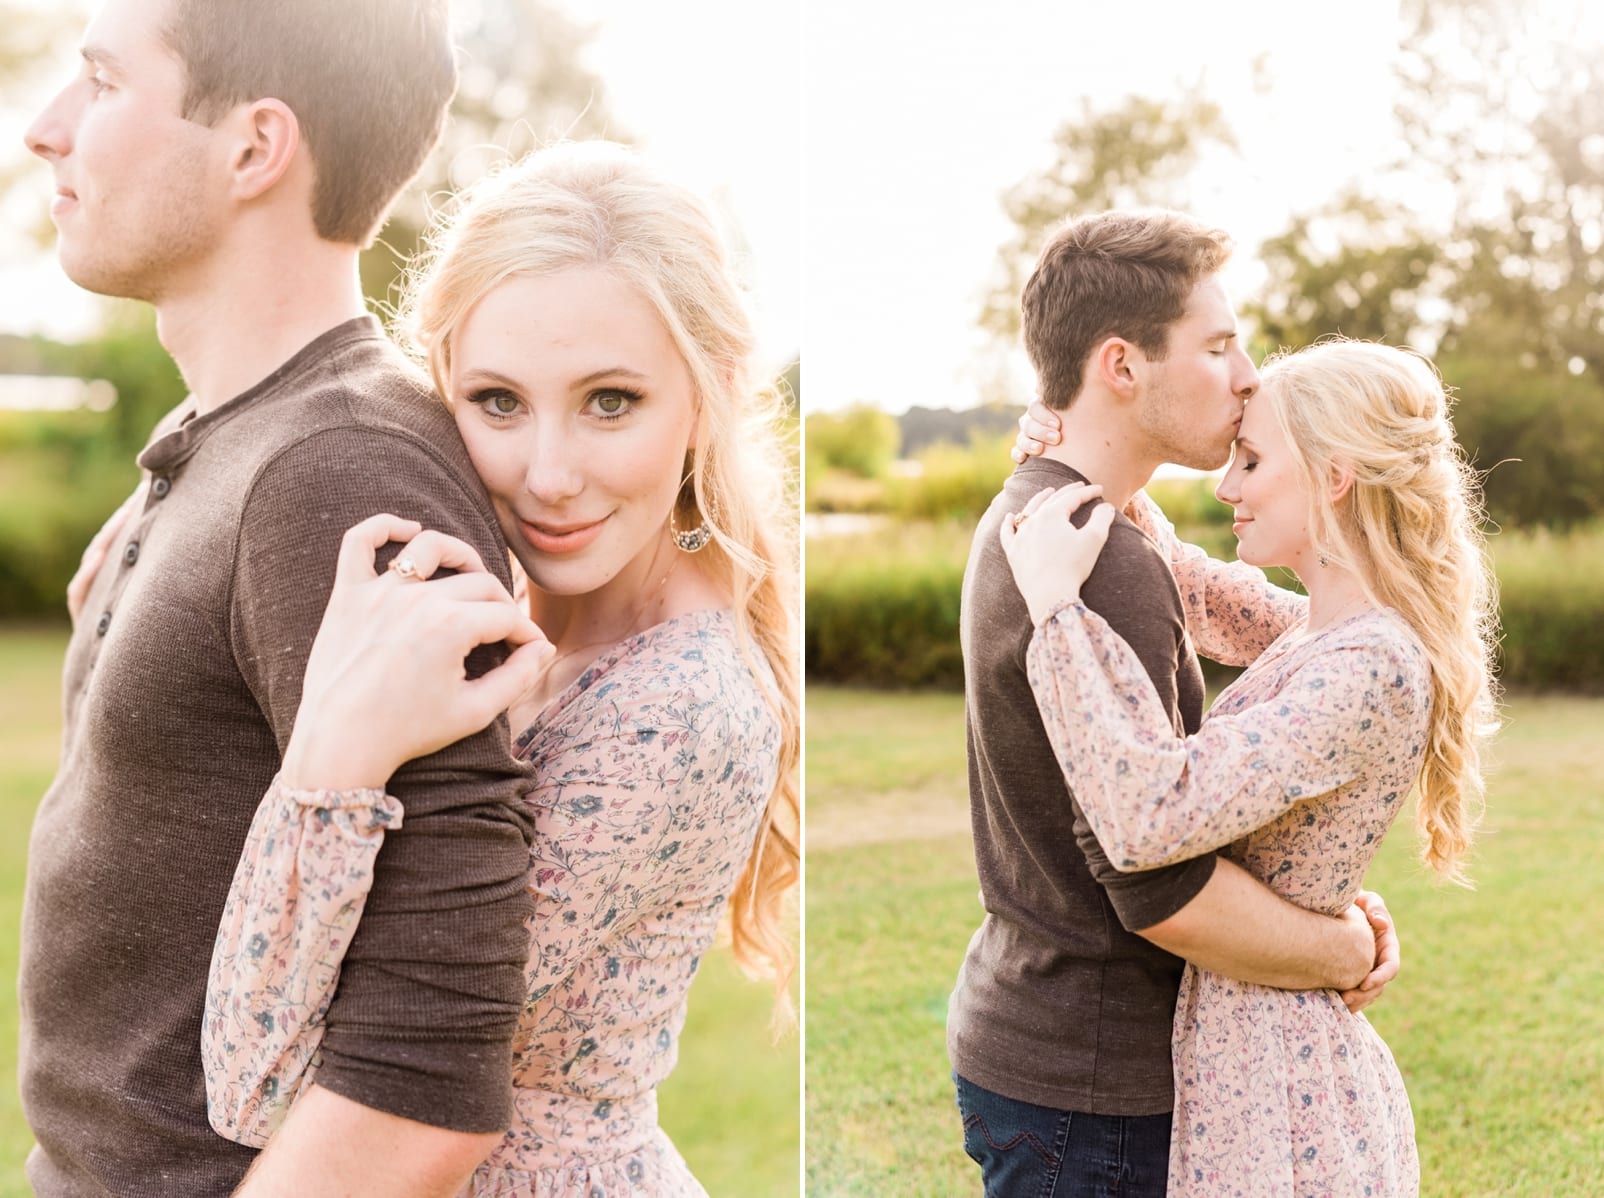 Couple embracing while he kisses her on the forehead during their raleigh engagement session photo